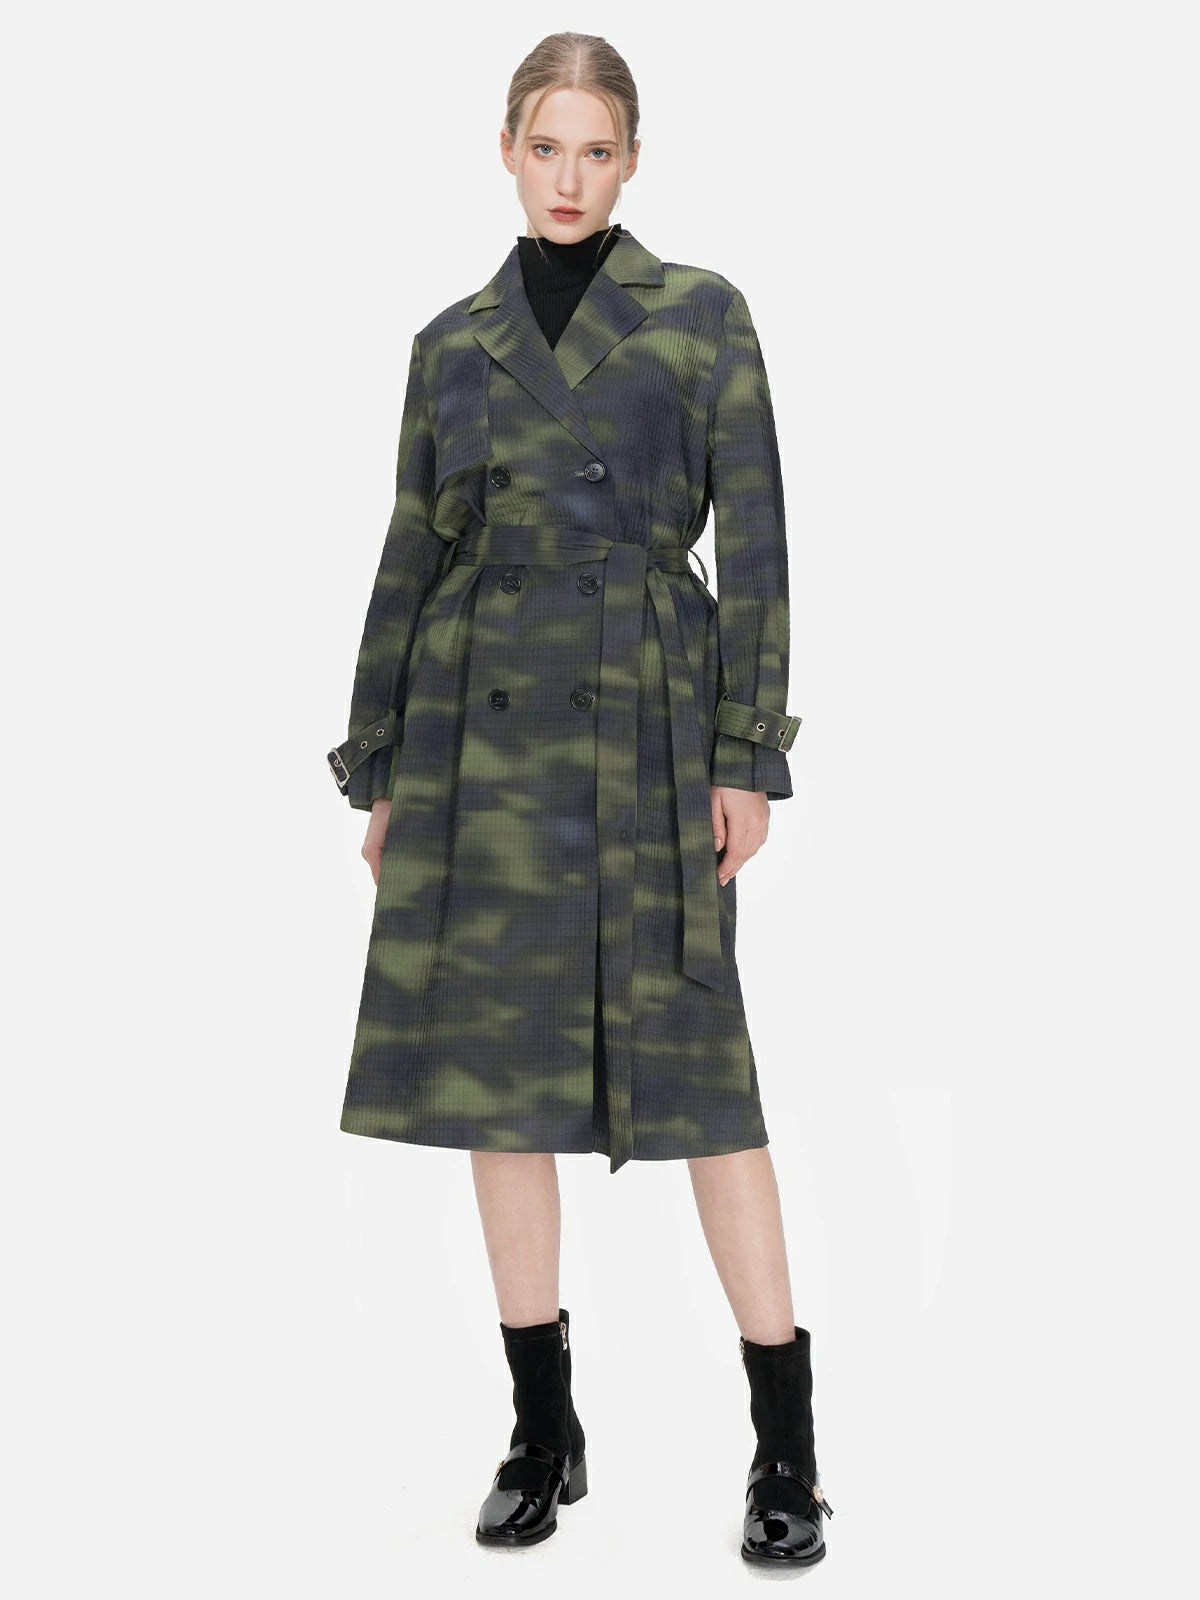 Make a fashion statement with this trench coat, showcasing an irregular green print on a gray backdrop, providing an artful and unique touch to your wardrobe.